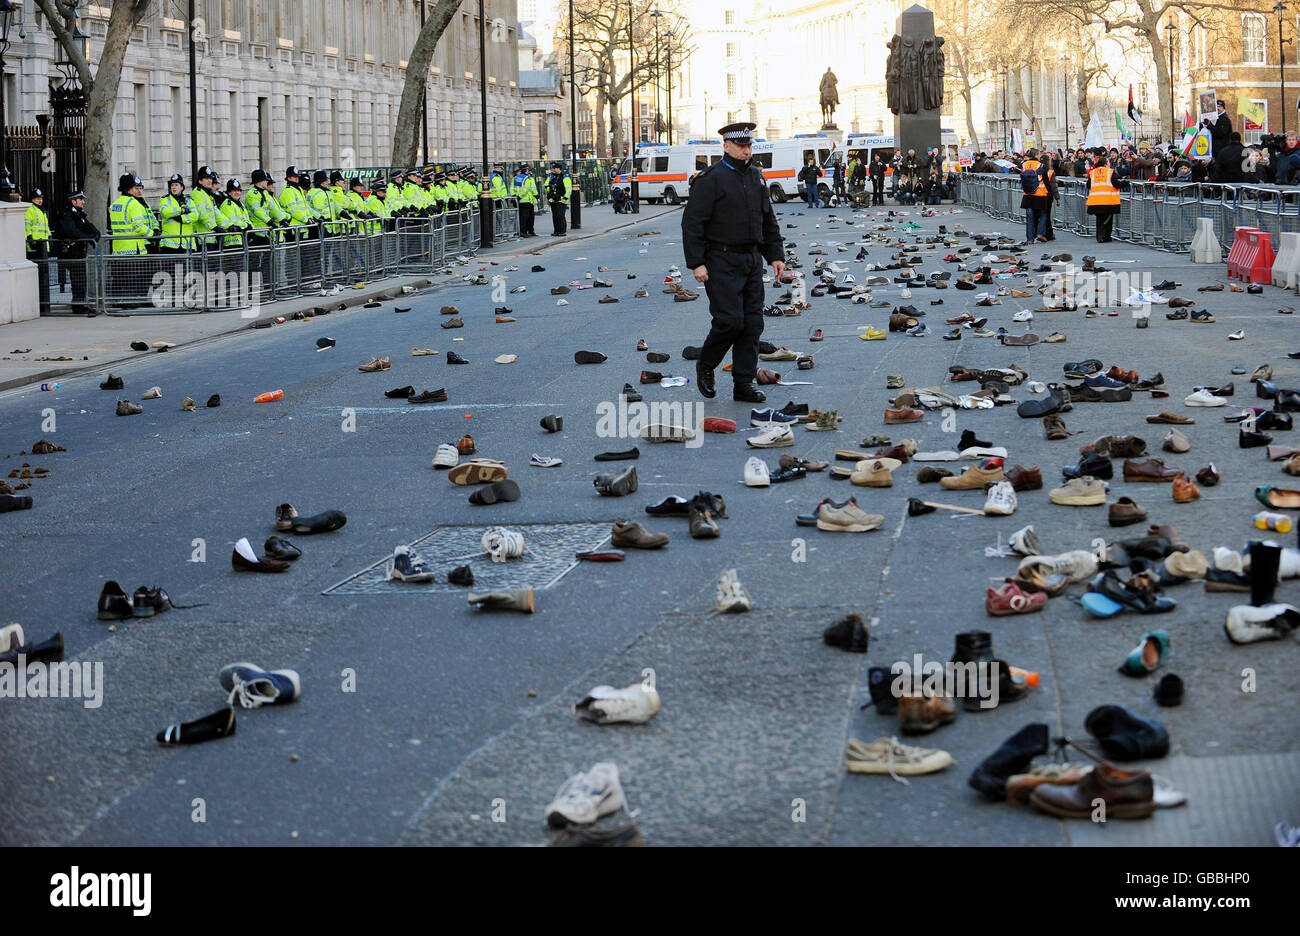 Hundreds of shoes lie in the street in Whitehall after protesters attempted to throw shoes into Downing Street in London. The protesters were demonstrating against the bombing of Gaza and are calling for an immediate end to the Israeli attacks. Stock Photo